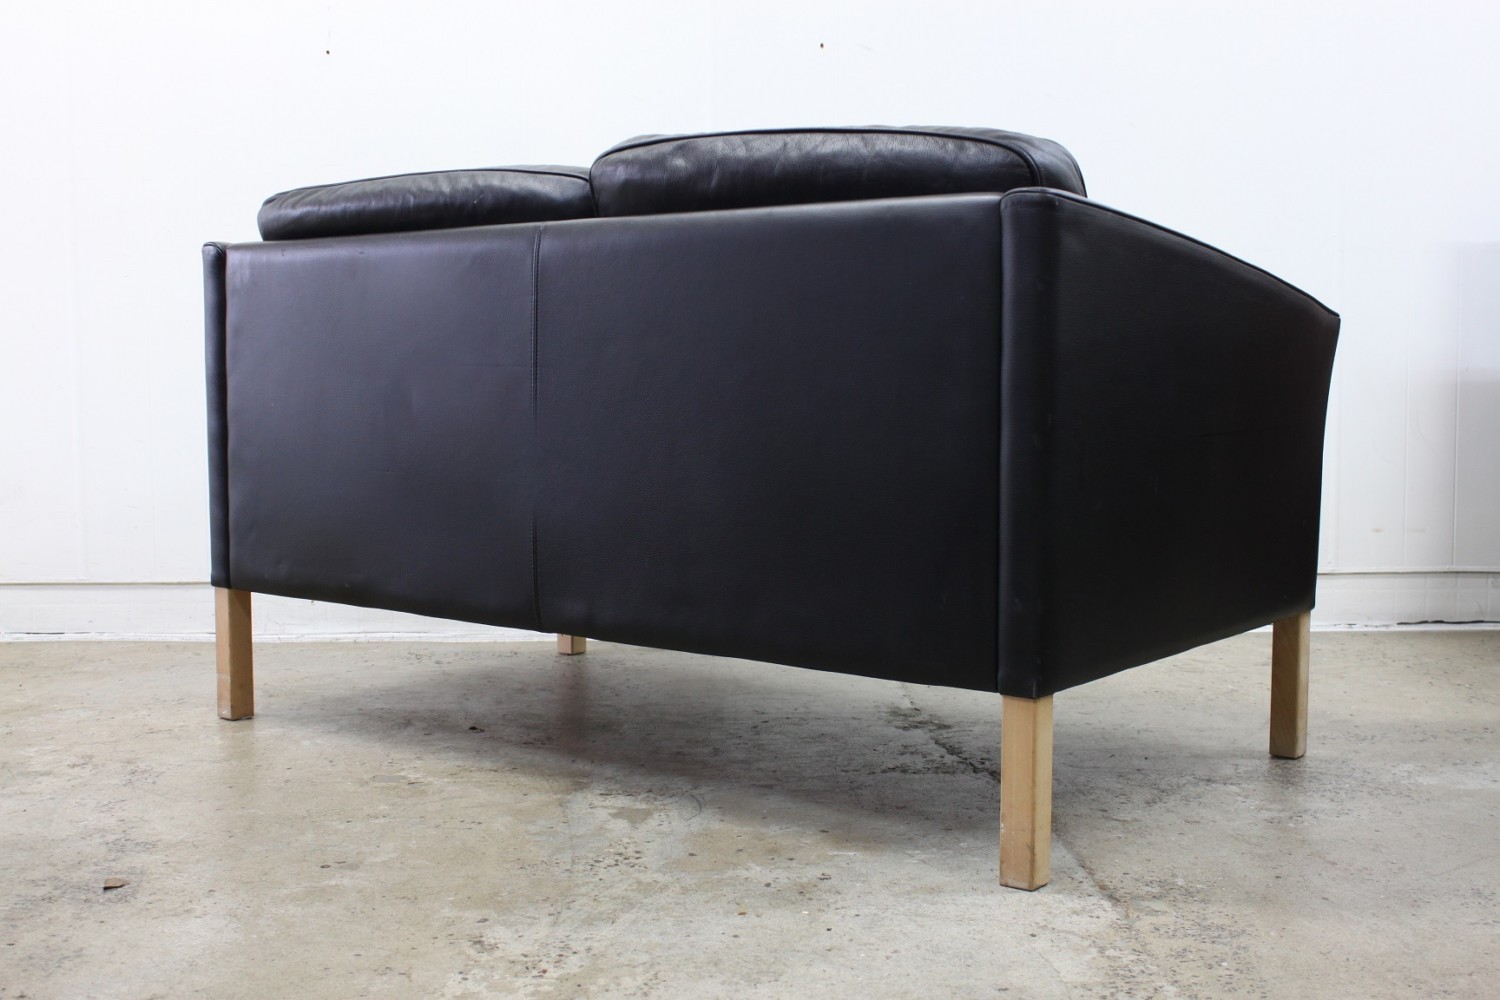 Two seater Black Leather Sofa by Stouby